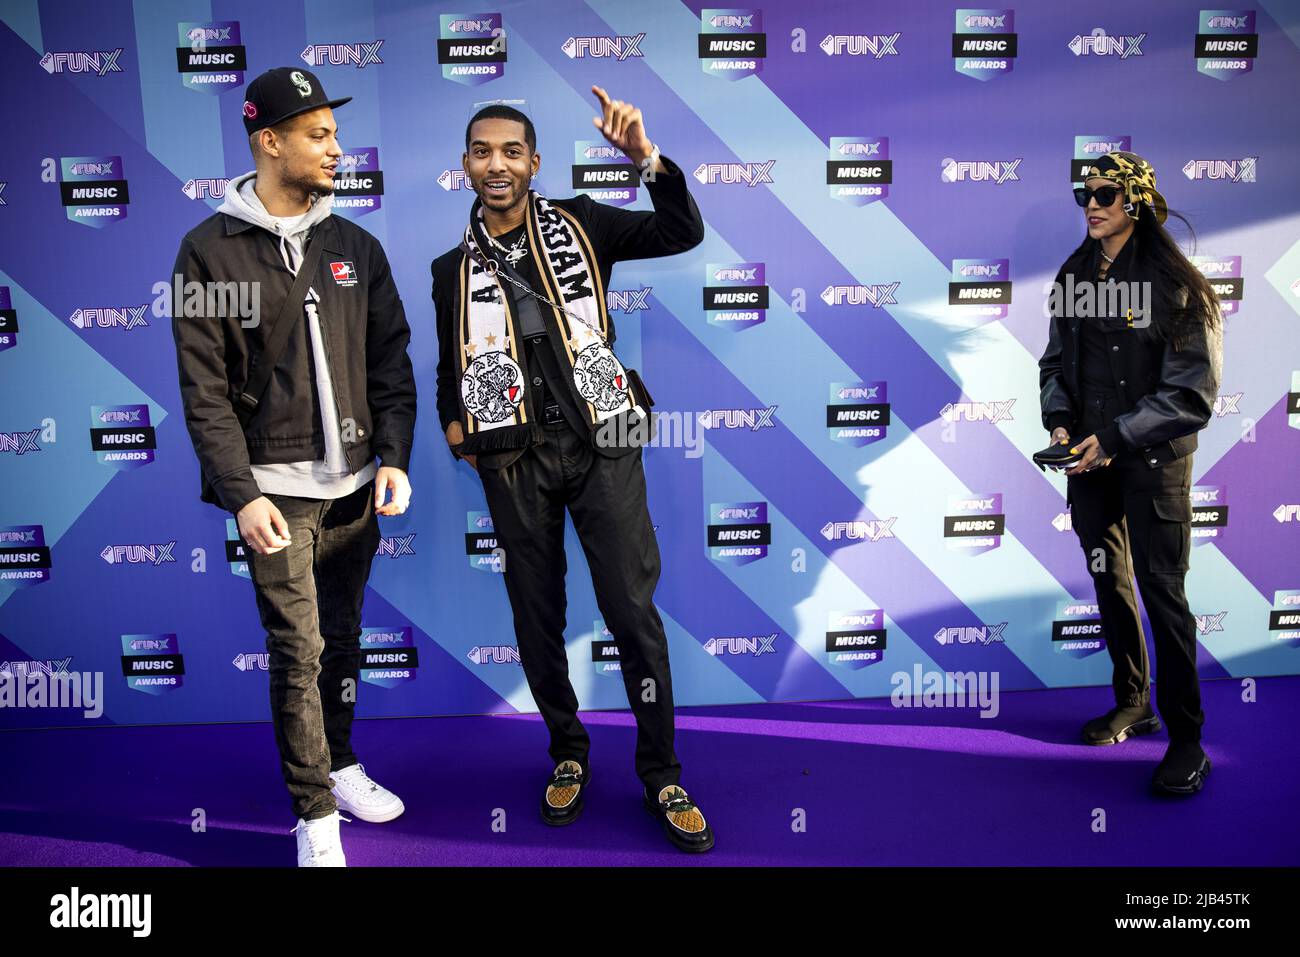 2022-06-02 20:11:03 AMSTERDAM - Rapper Sor and Latu on the purple carpet for the FunX Music Awards in AFAS Live in Amsterdam. During the award show, the most important music prizes of the young Netherlands are presented. ANP RAMON VAN FLYMEN netherlands out - belgium out Stock Photo